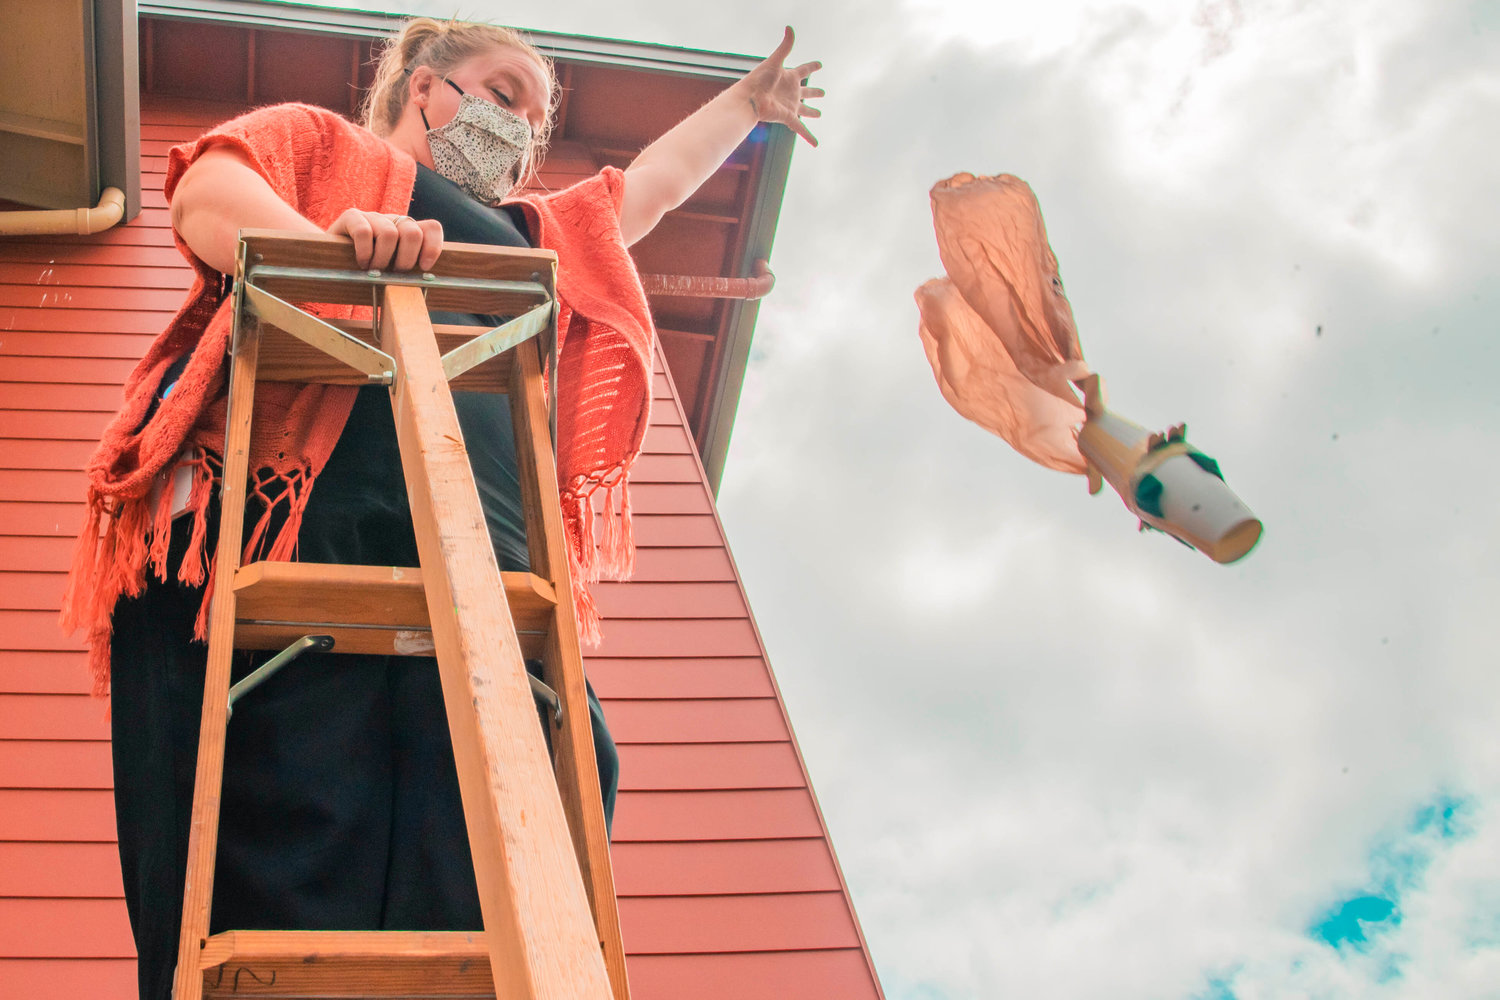 Sixth-grade student creations drop to the ground from a high ladder in an effort to protect an egg inside during a science project Thursday at Fords Prairie Elementary in Centralia.